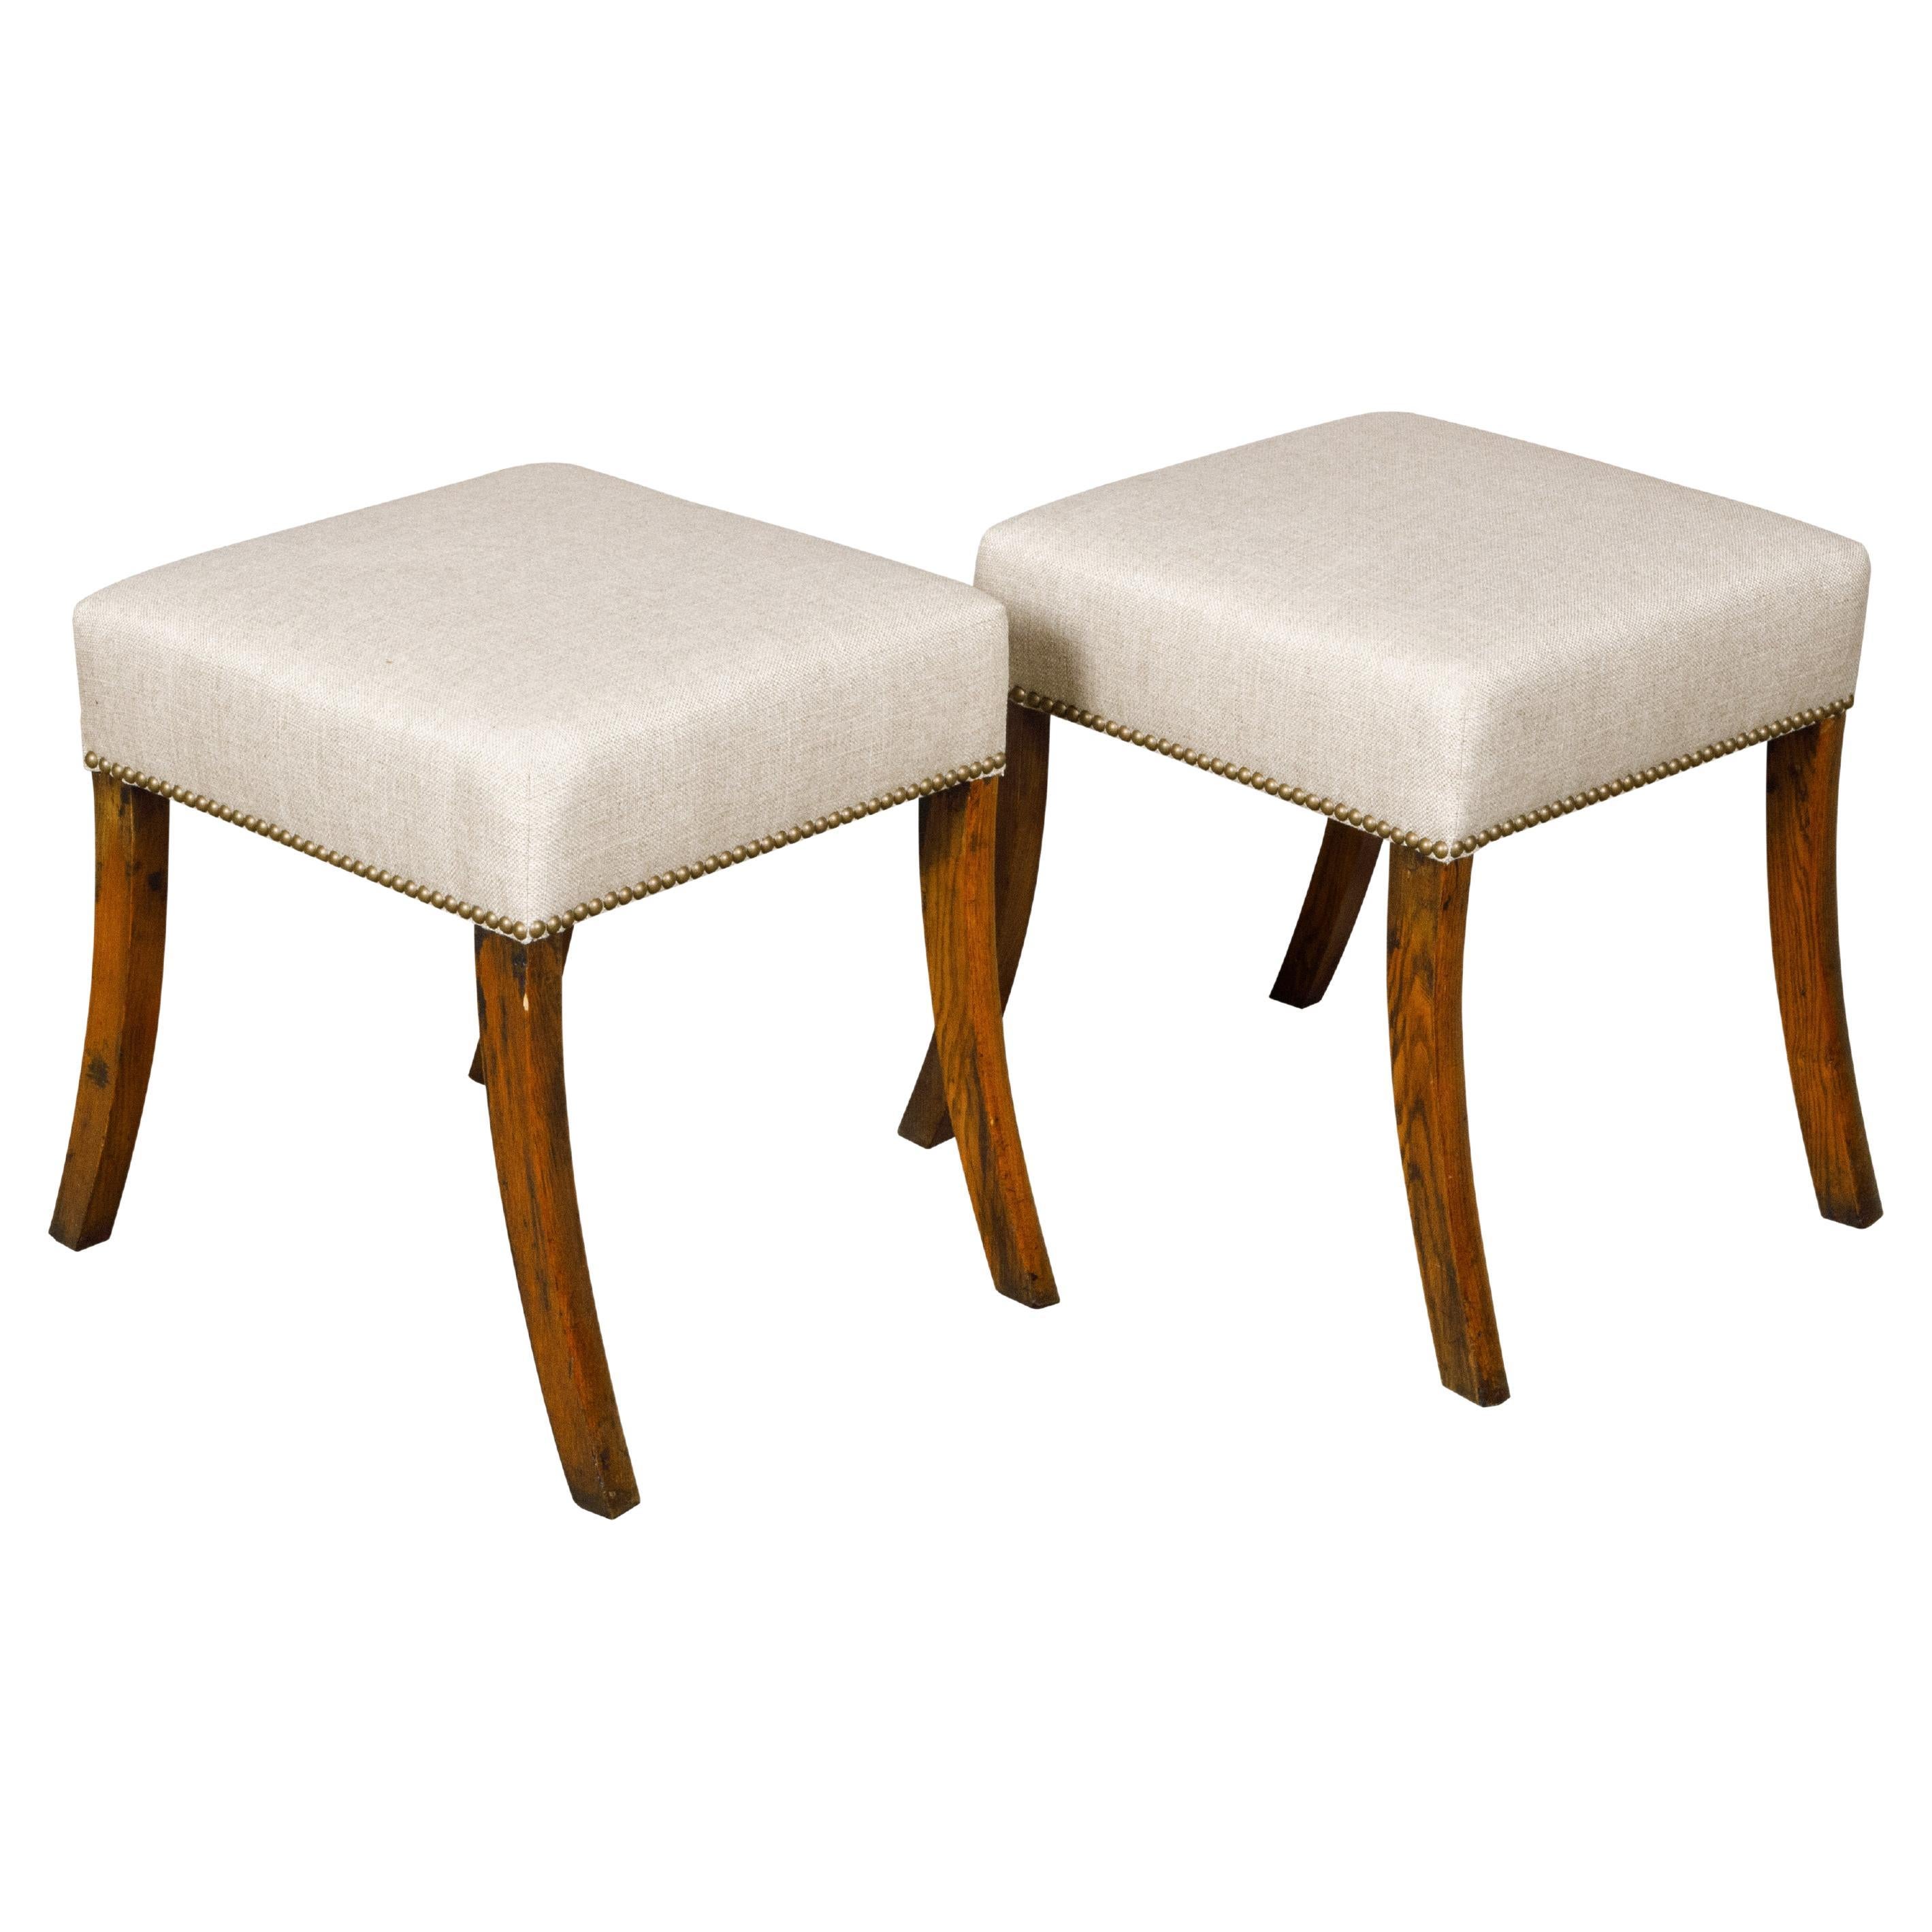 Pair of English 19th Century Oak Stools with Saber Legs and Custom Upholstery